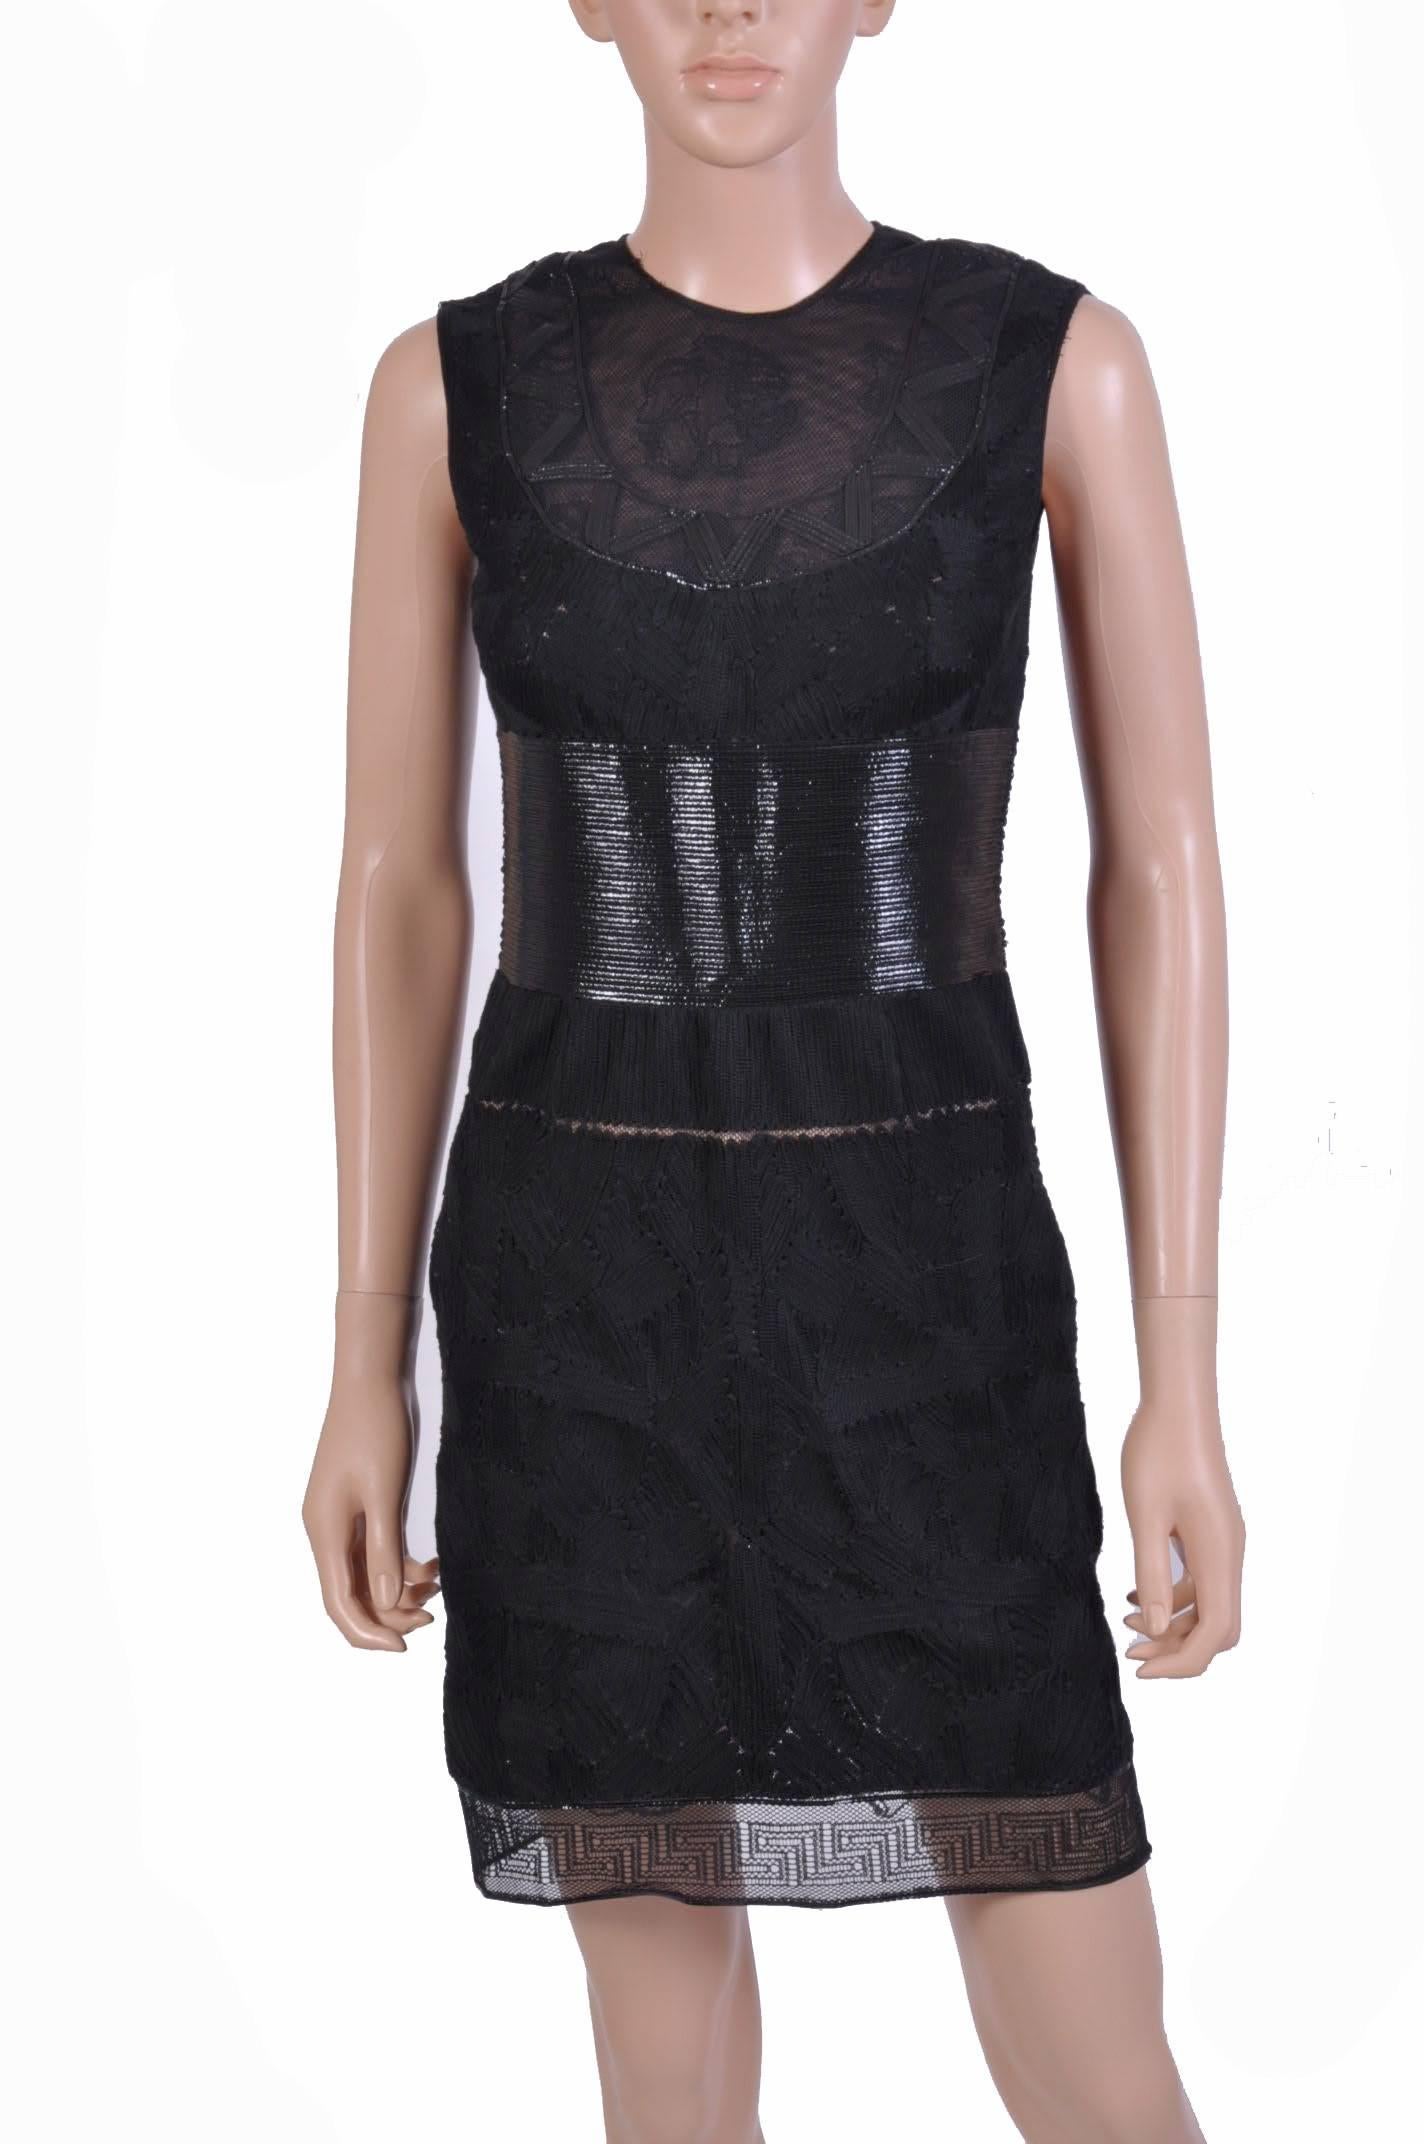 VERSACE DRESS


Fine and delicate black tulle is finished with patent leather and knit detail.

Concealed hook and zip fastening

70% cotton,  30% nylon

Made in Italy

IT Size  38 

Brand New, with tags
